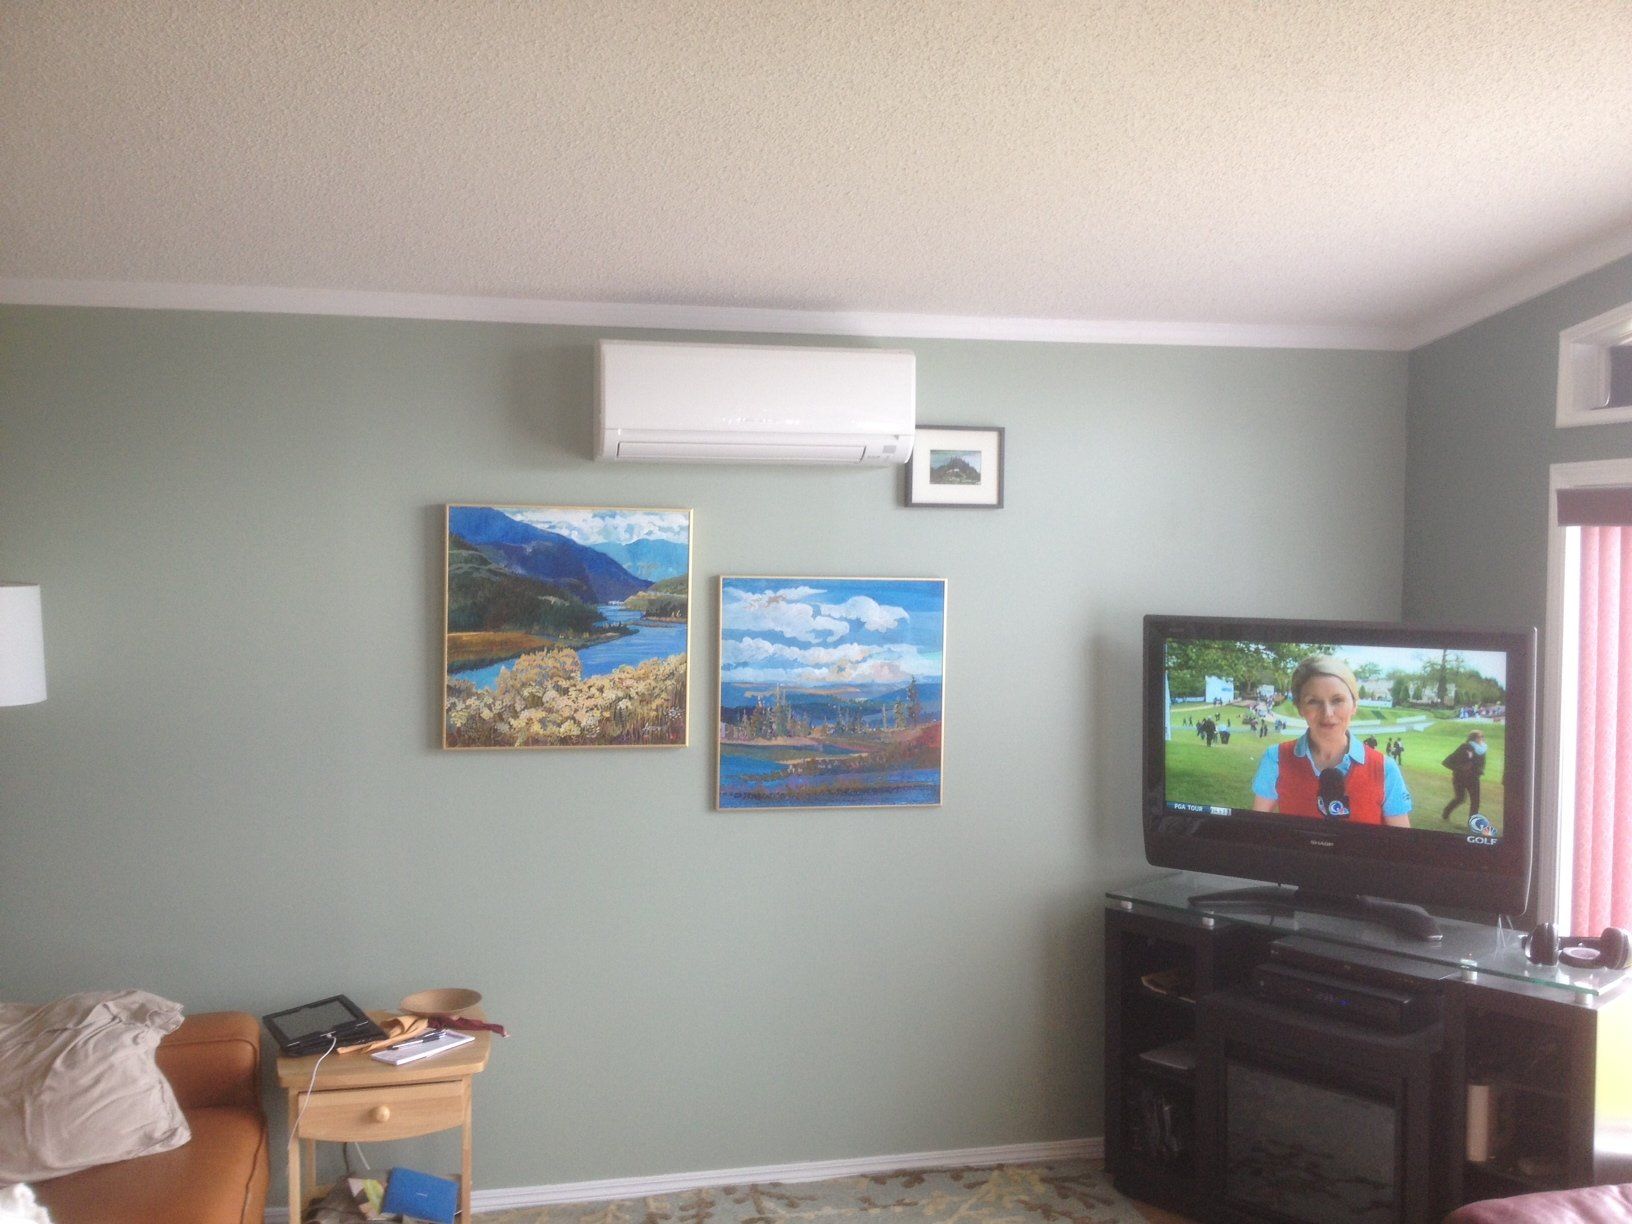 Newly installed ventless air conditioning unit in Albany, NY